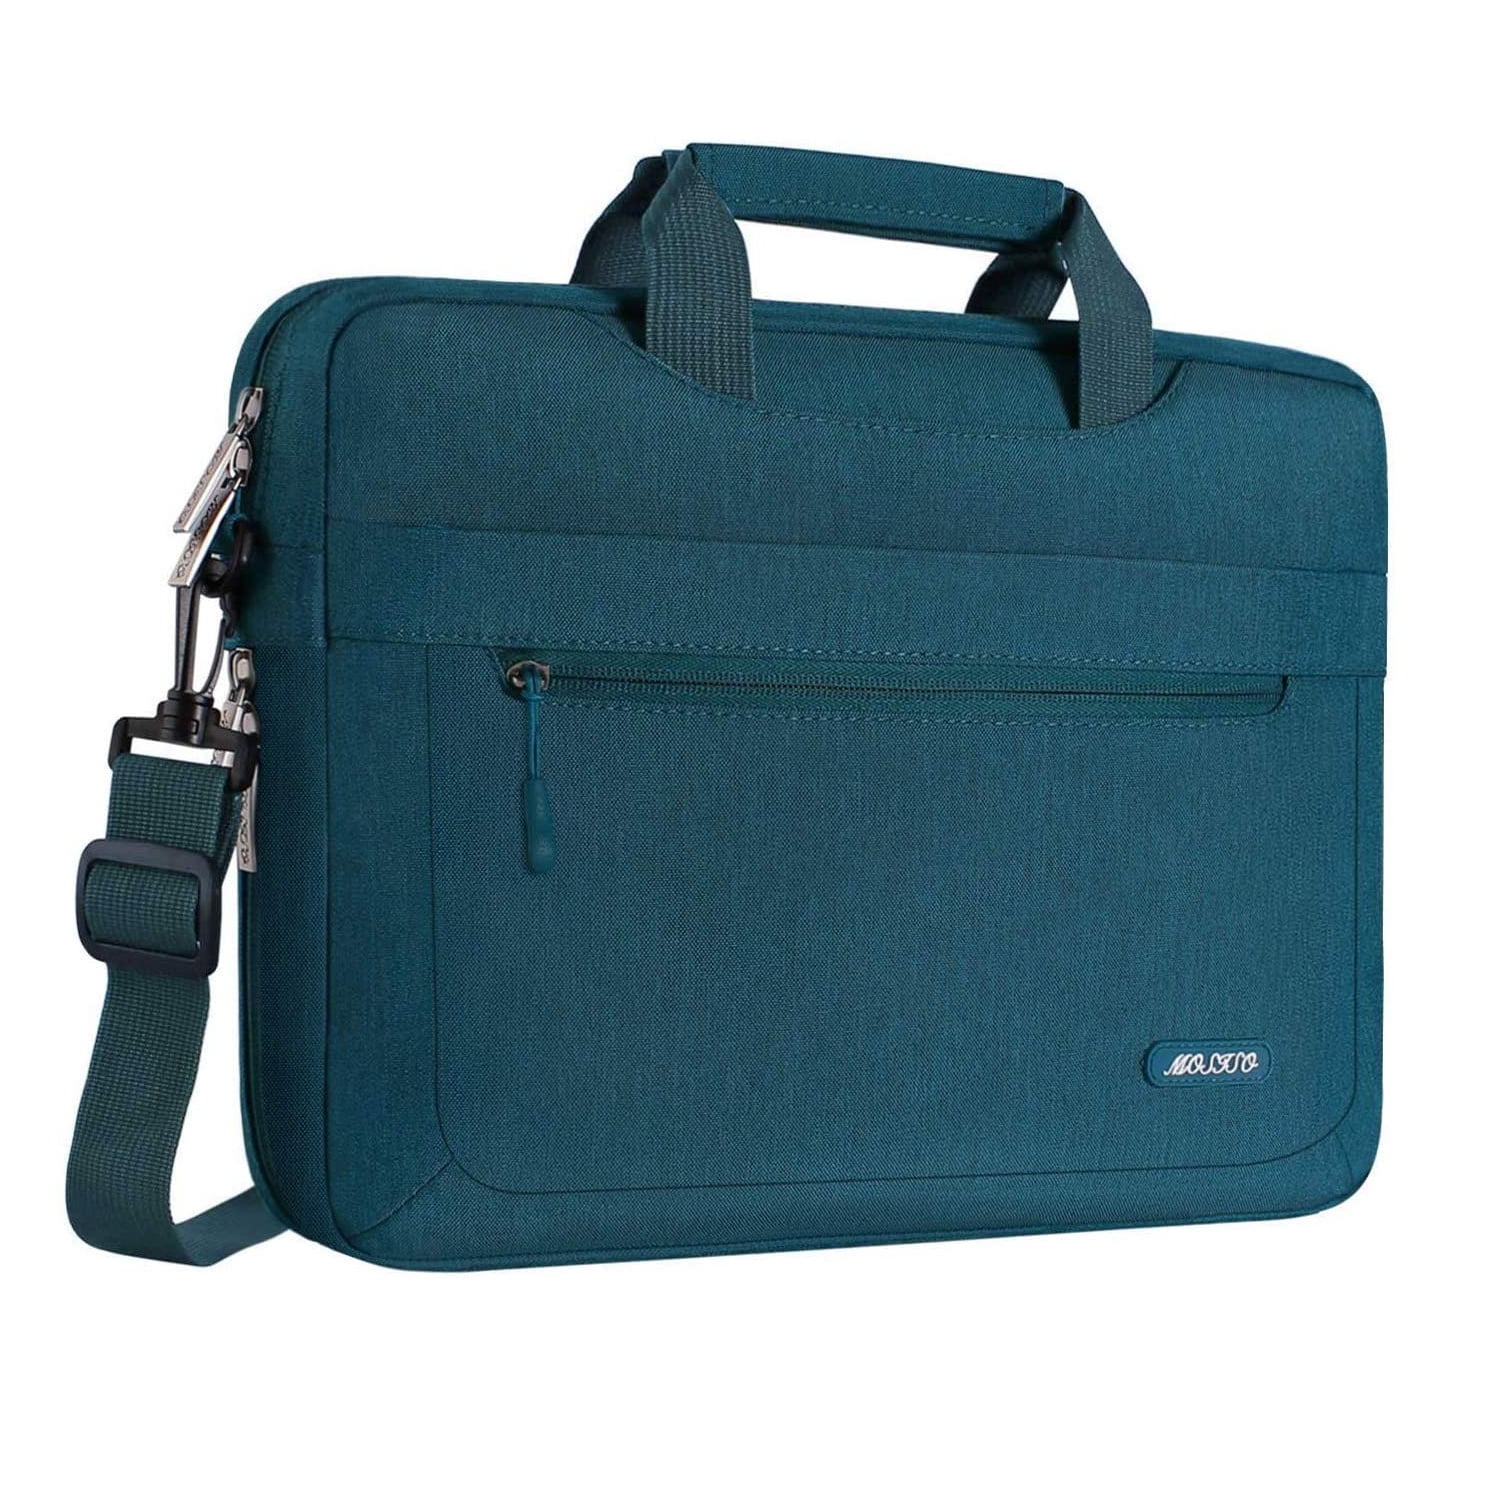 Polyester Flapover Briefcase Sleeve Case 15-15.6 inch Notebook Mint Blue MOSISO Laptop Shoulder Bag Compatible with MacBook Pro 16 inch A2141 2020 2019/Pro Retina 15 A1398